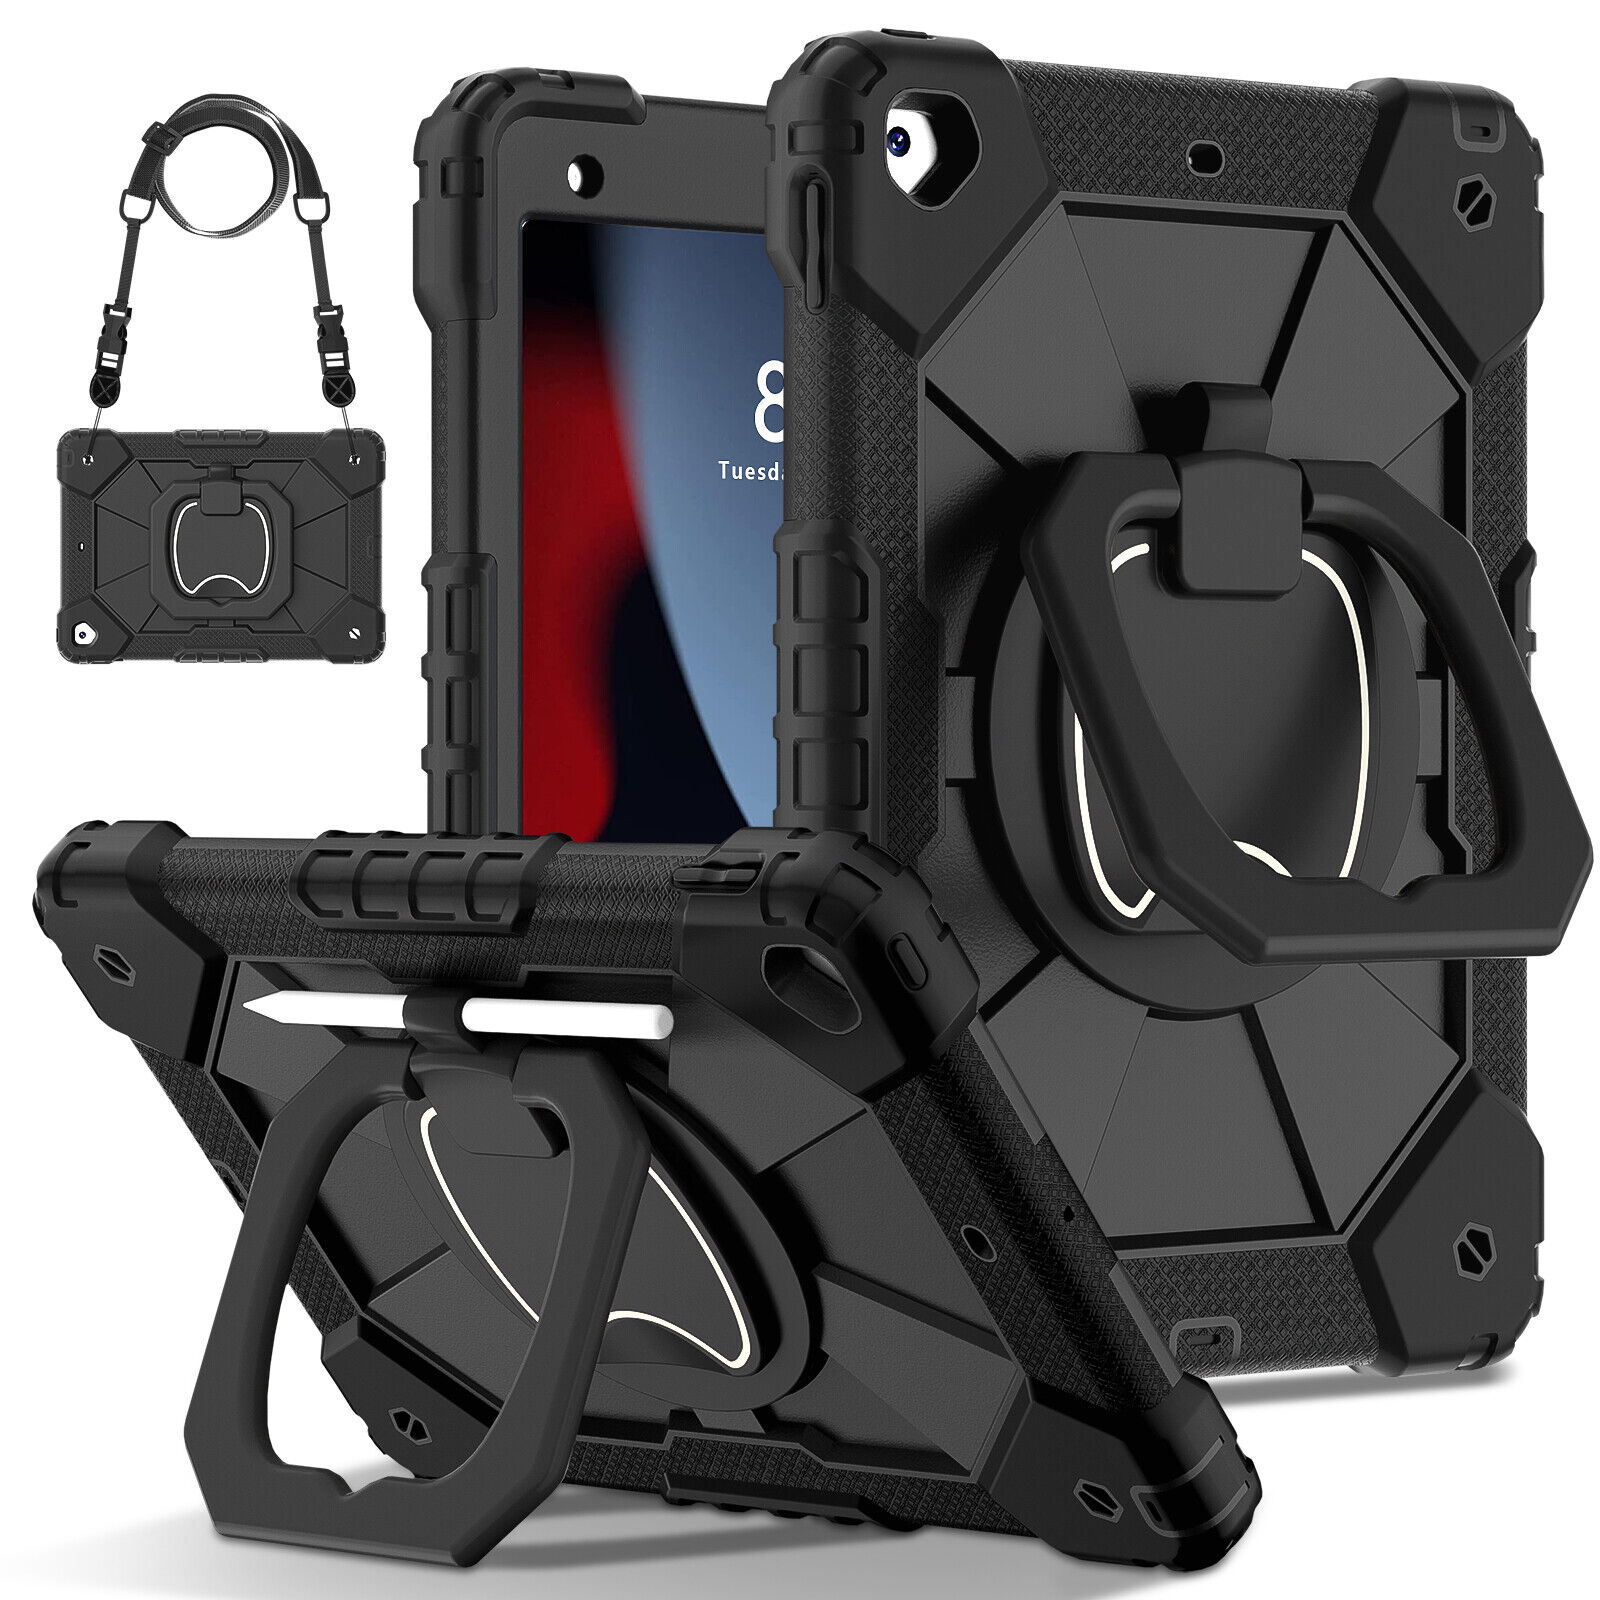 Rotating Heavy Duty Stand Case Cover For iPad 5 /6th 7th 8th 9th 10th Generation